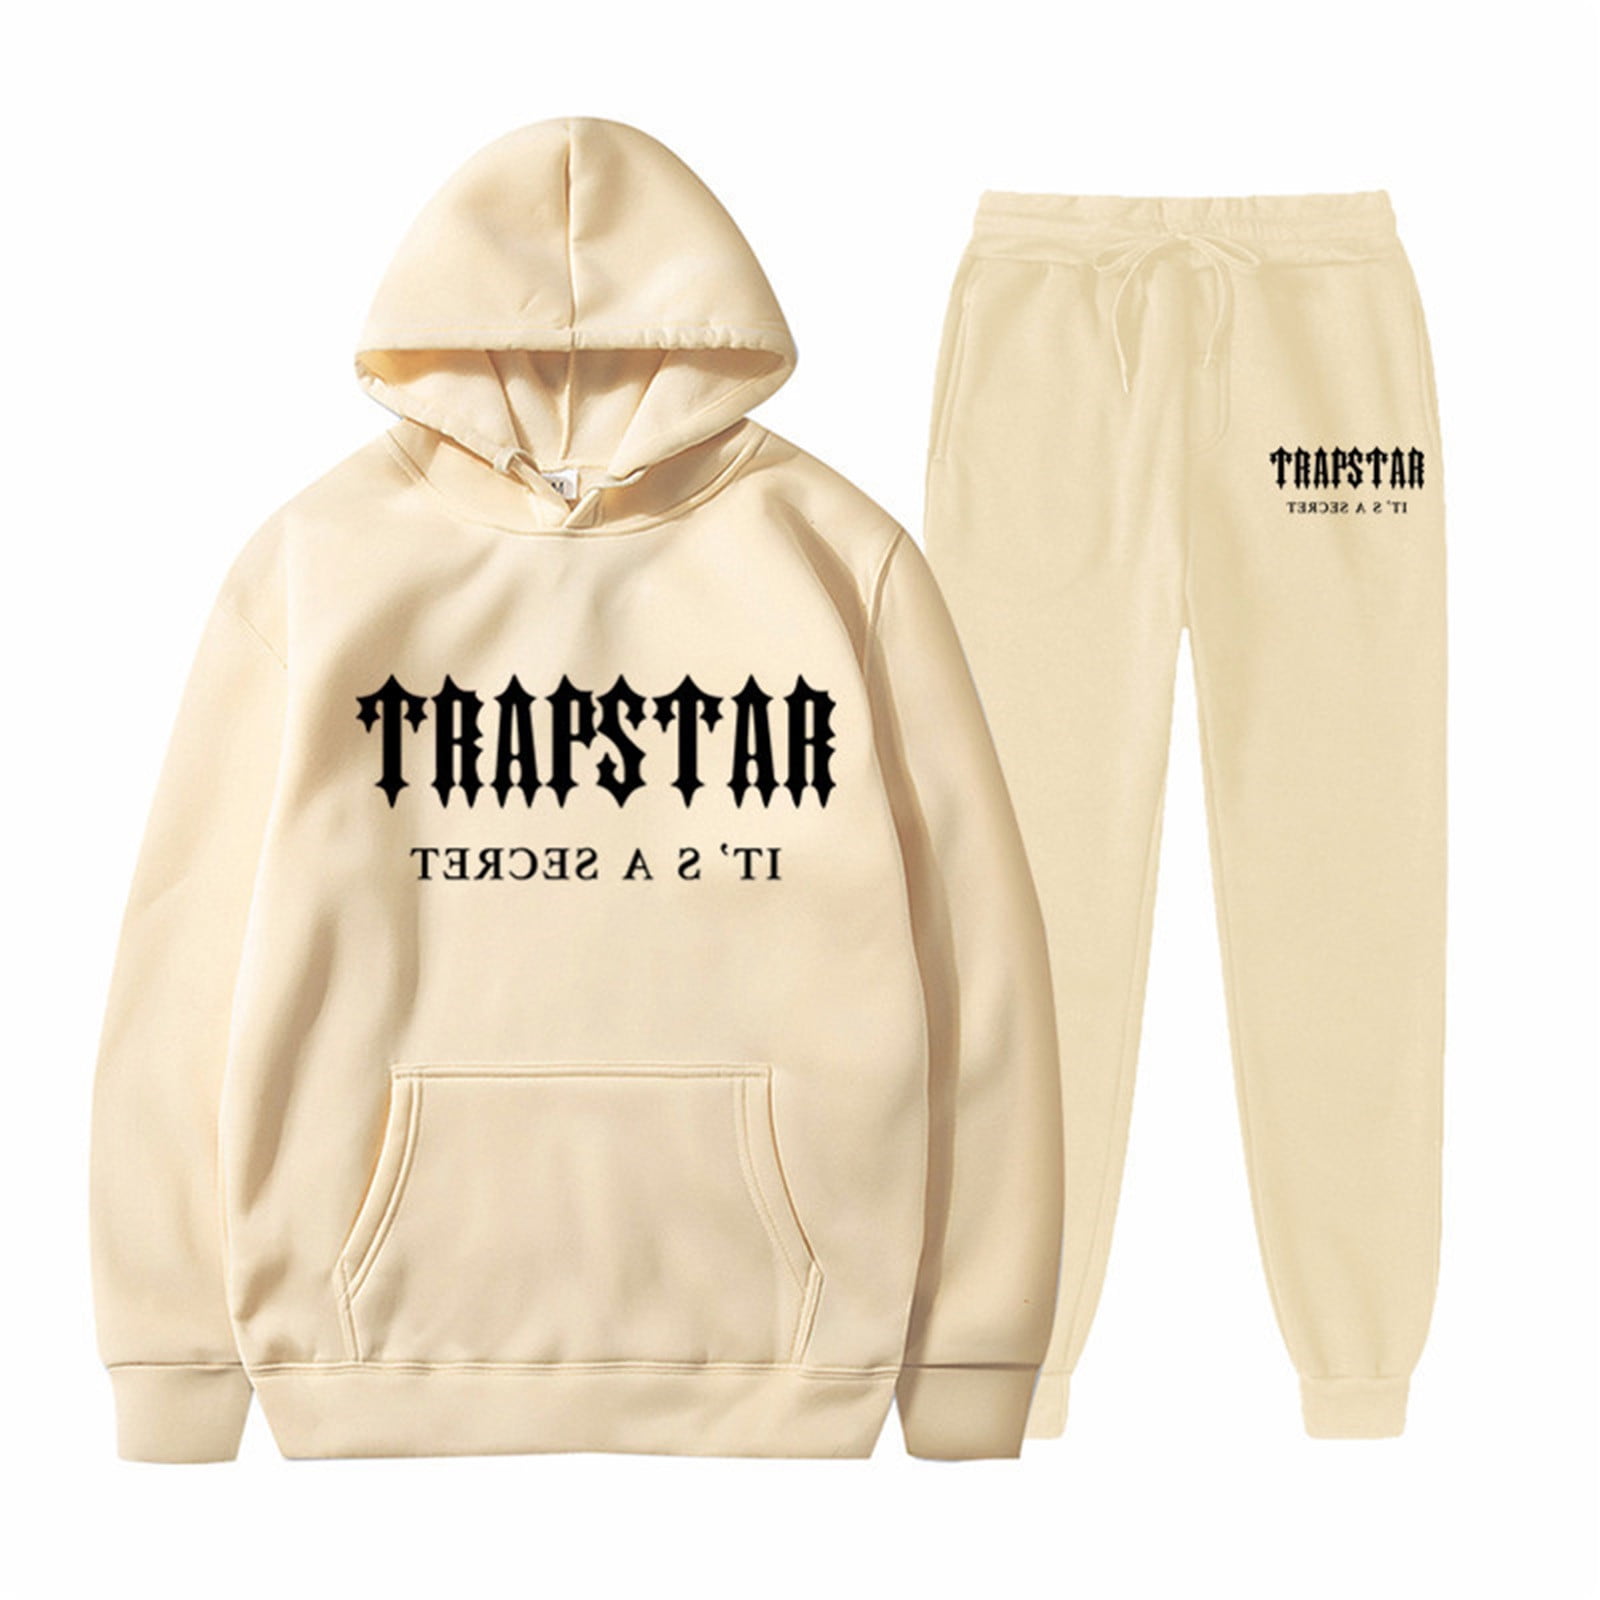 Don't Miss Out! Gomind Trapstar Women's Printed Sweatshirts Sets ...